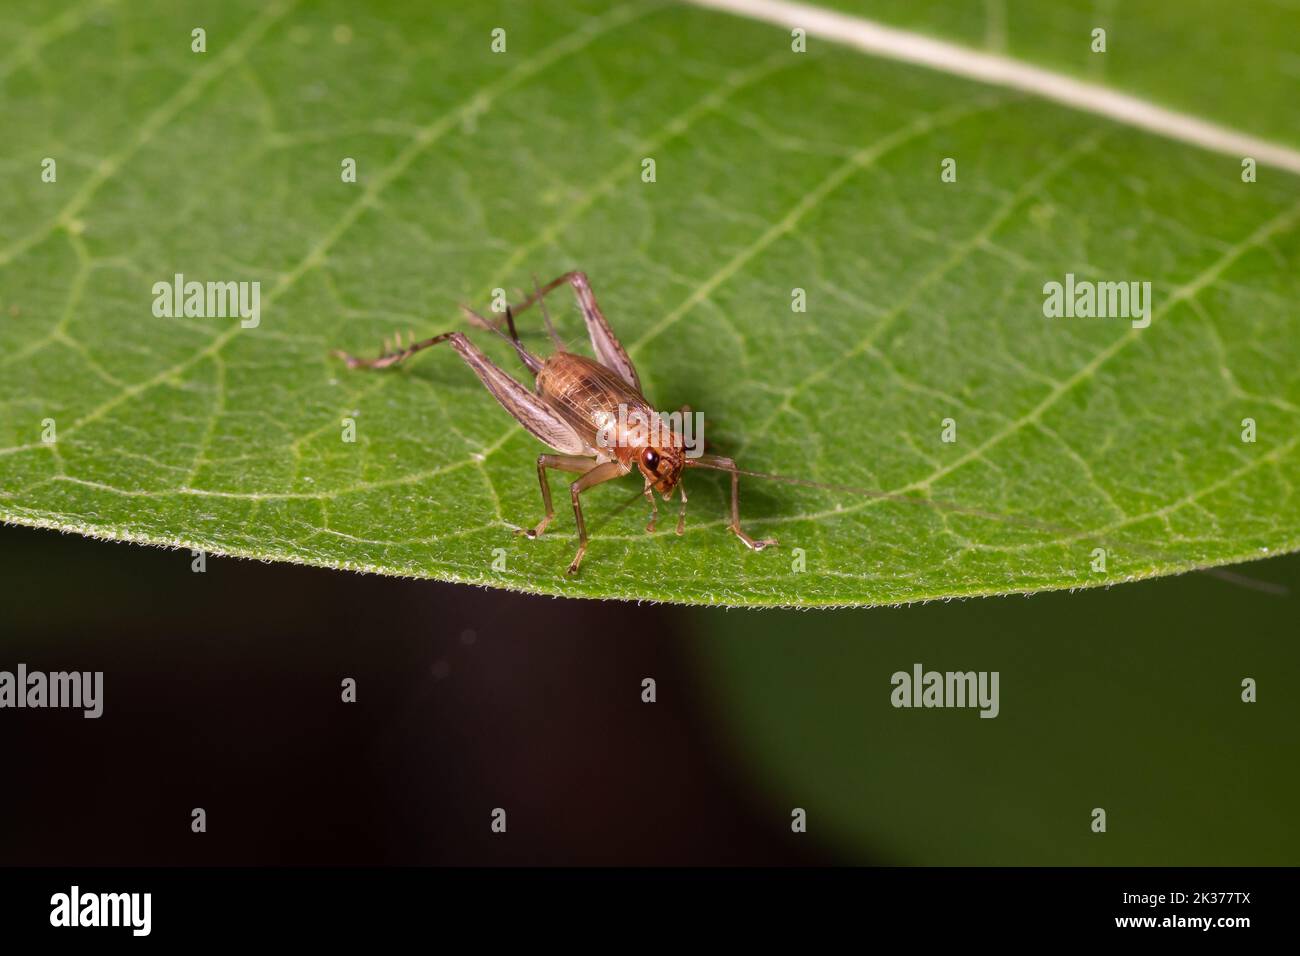 Closeup of House cricket nymph on leaf of plant. pest control, insect and nature conservation concept. Stock Photo